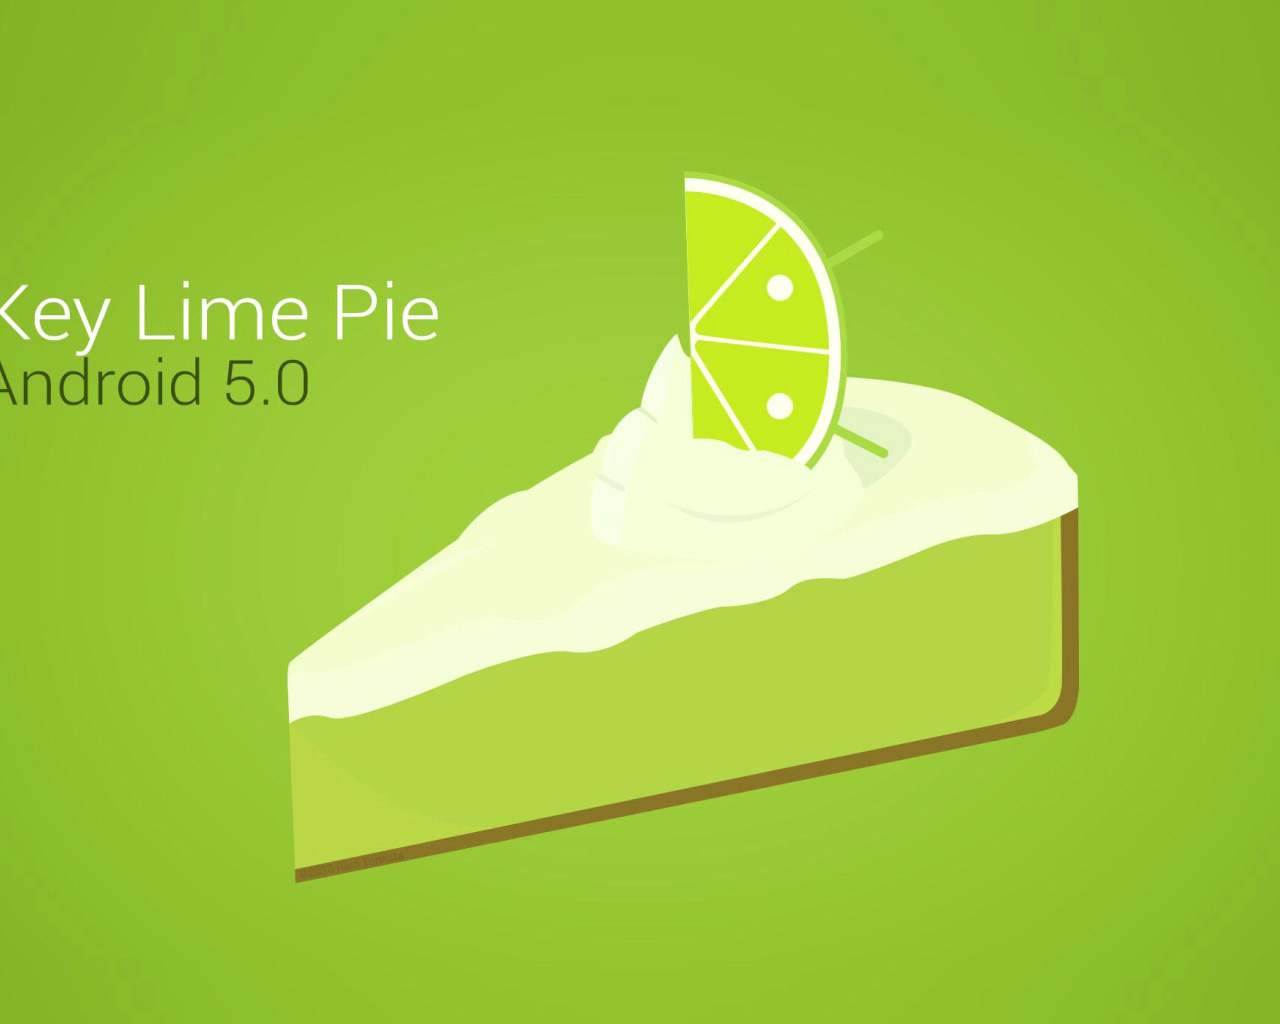 Das Concept Android 5.0 Key Lime Pie Wallpaper 1280x1024